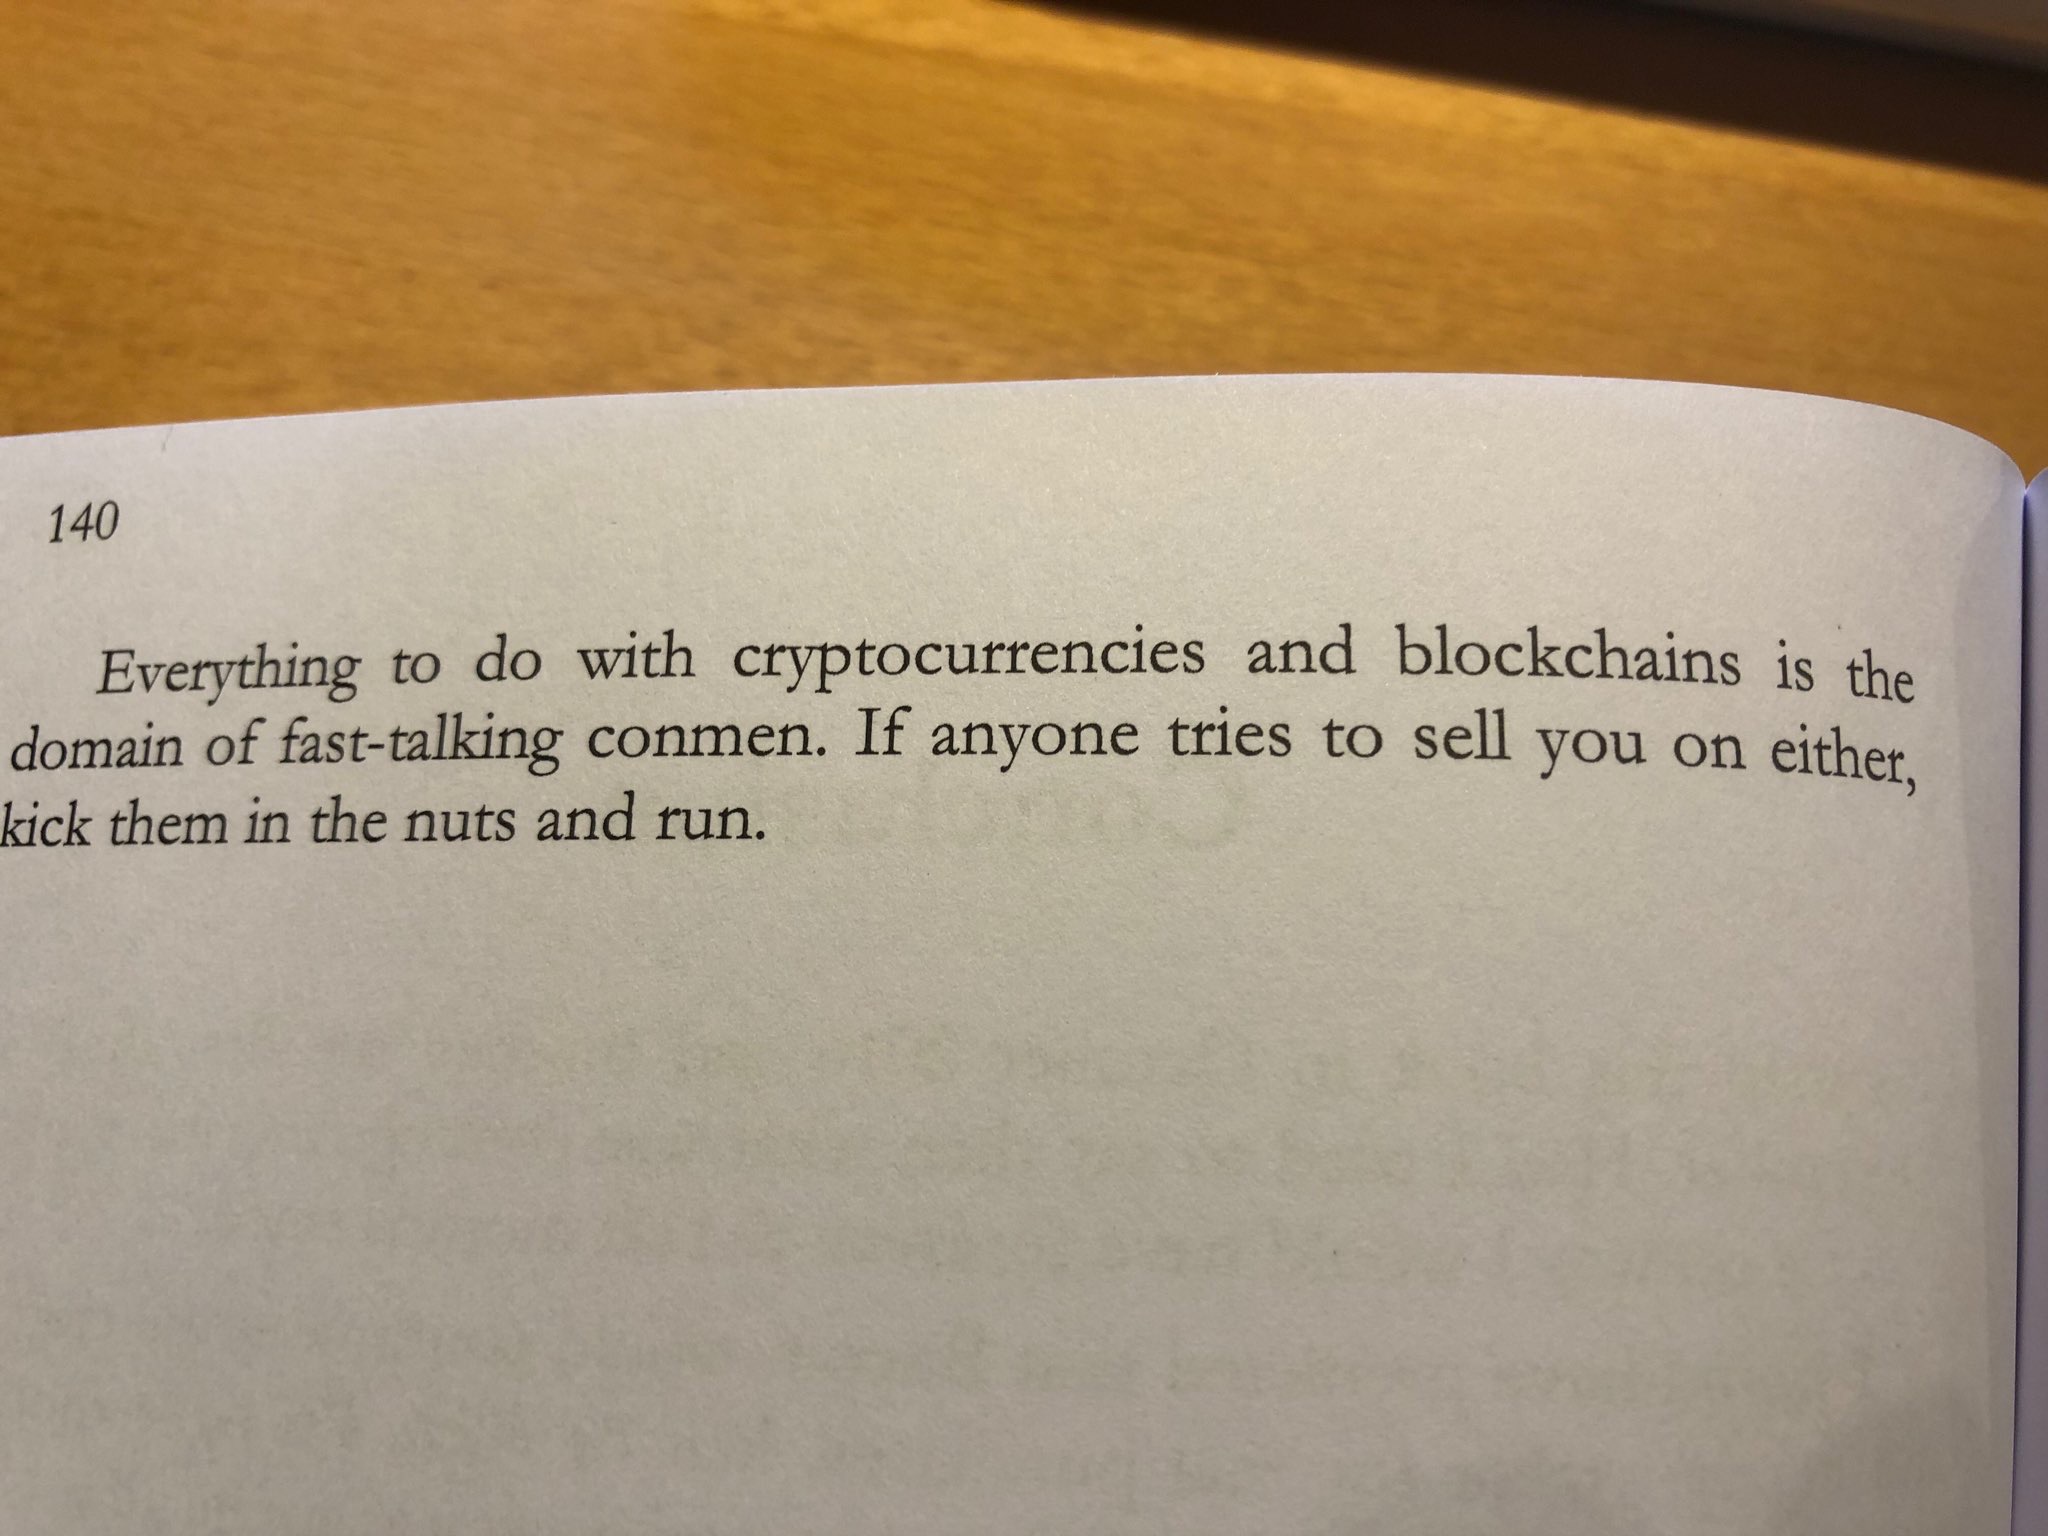 page 140 about cryptocurrencies.